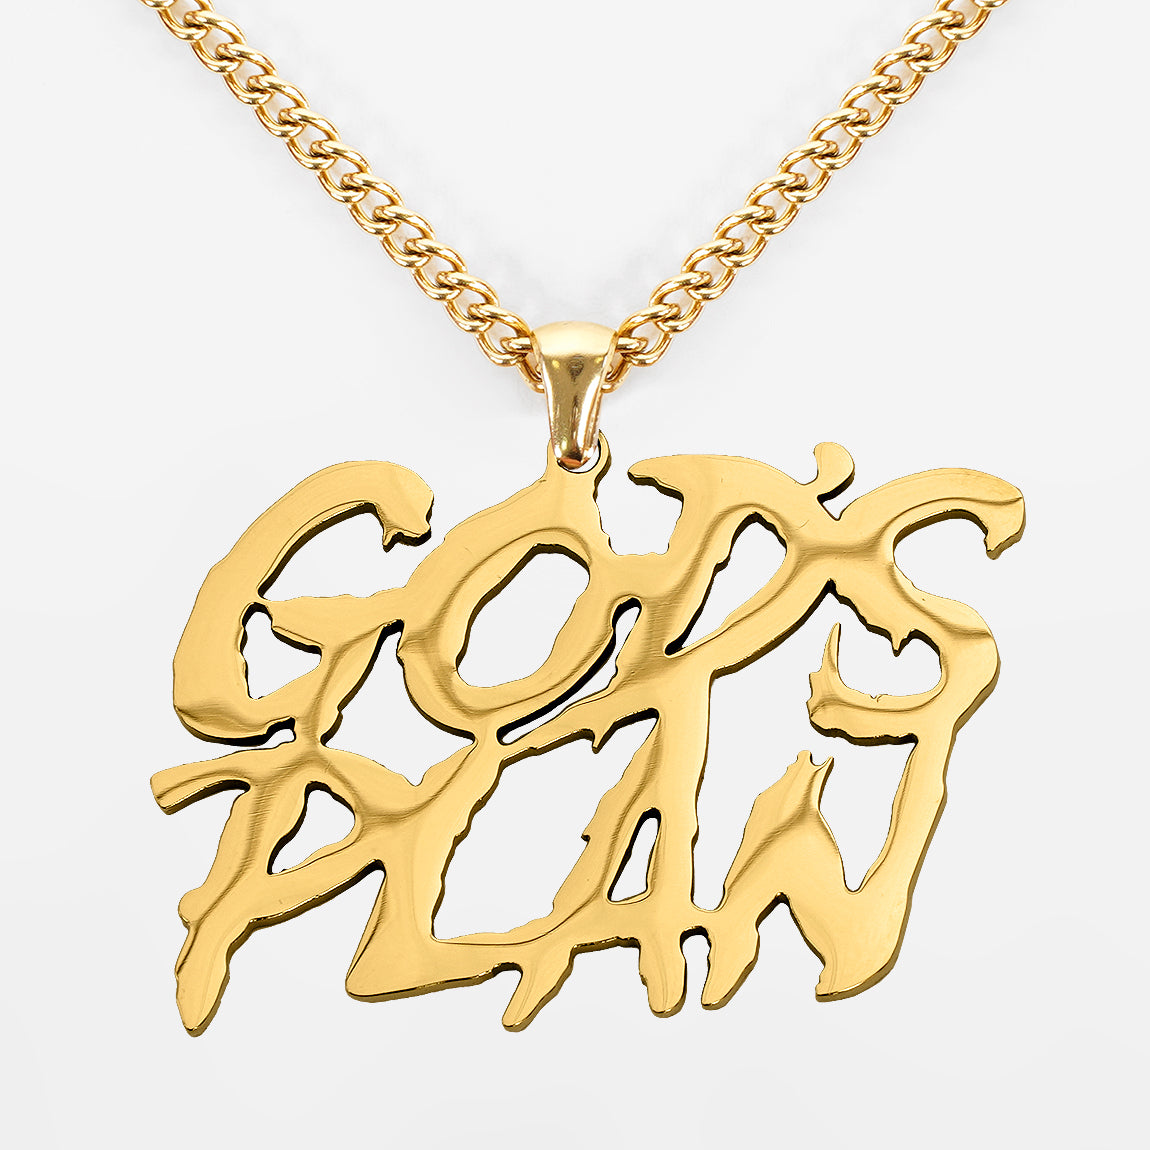 God's Plan Pendant with Chain Necklace - Gold Plated Stainless Steel